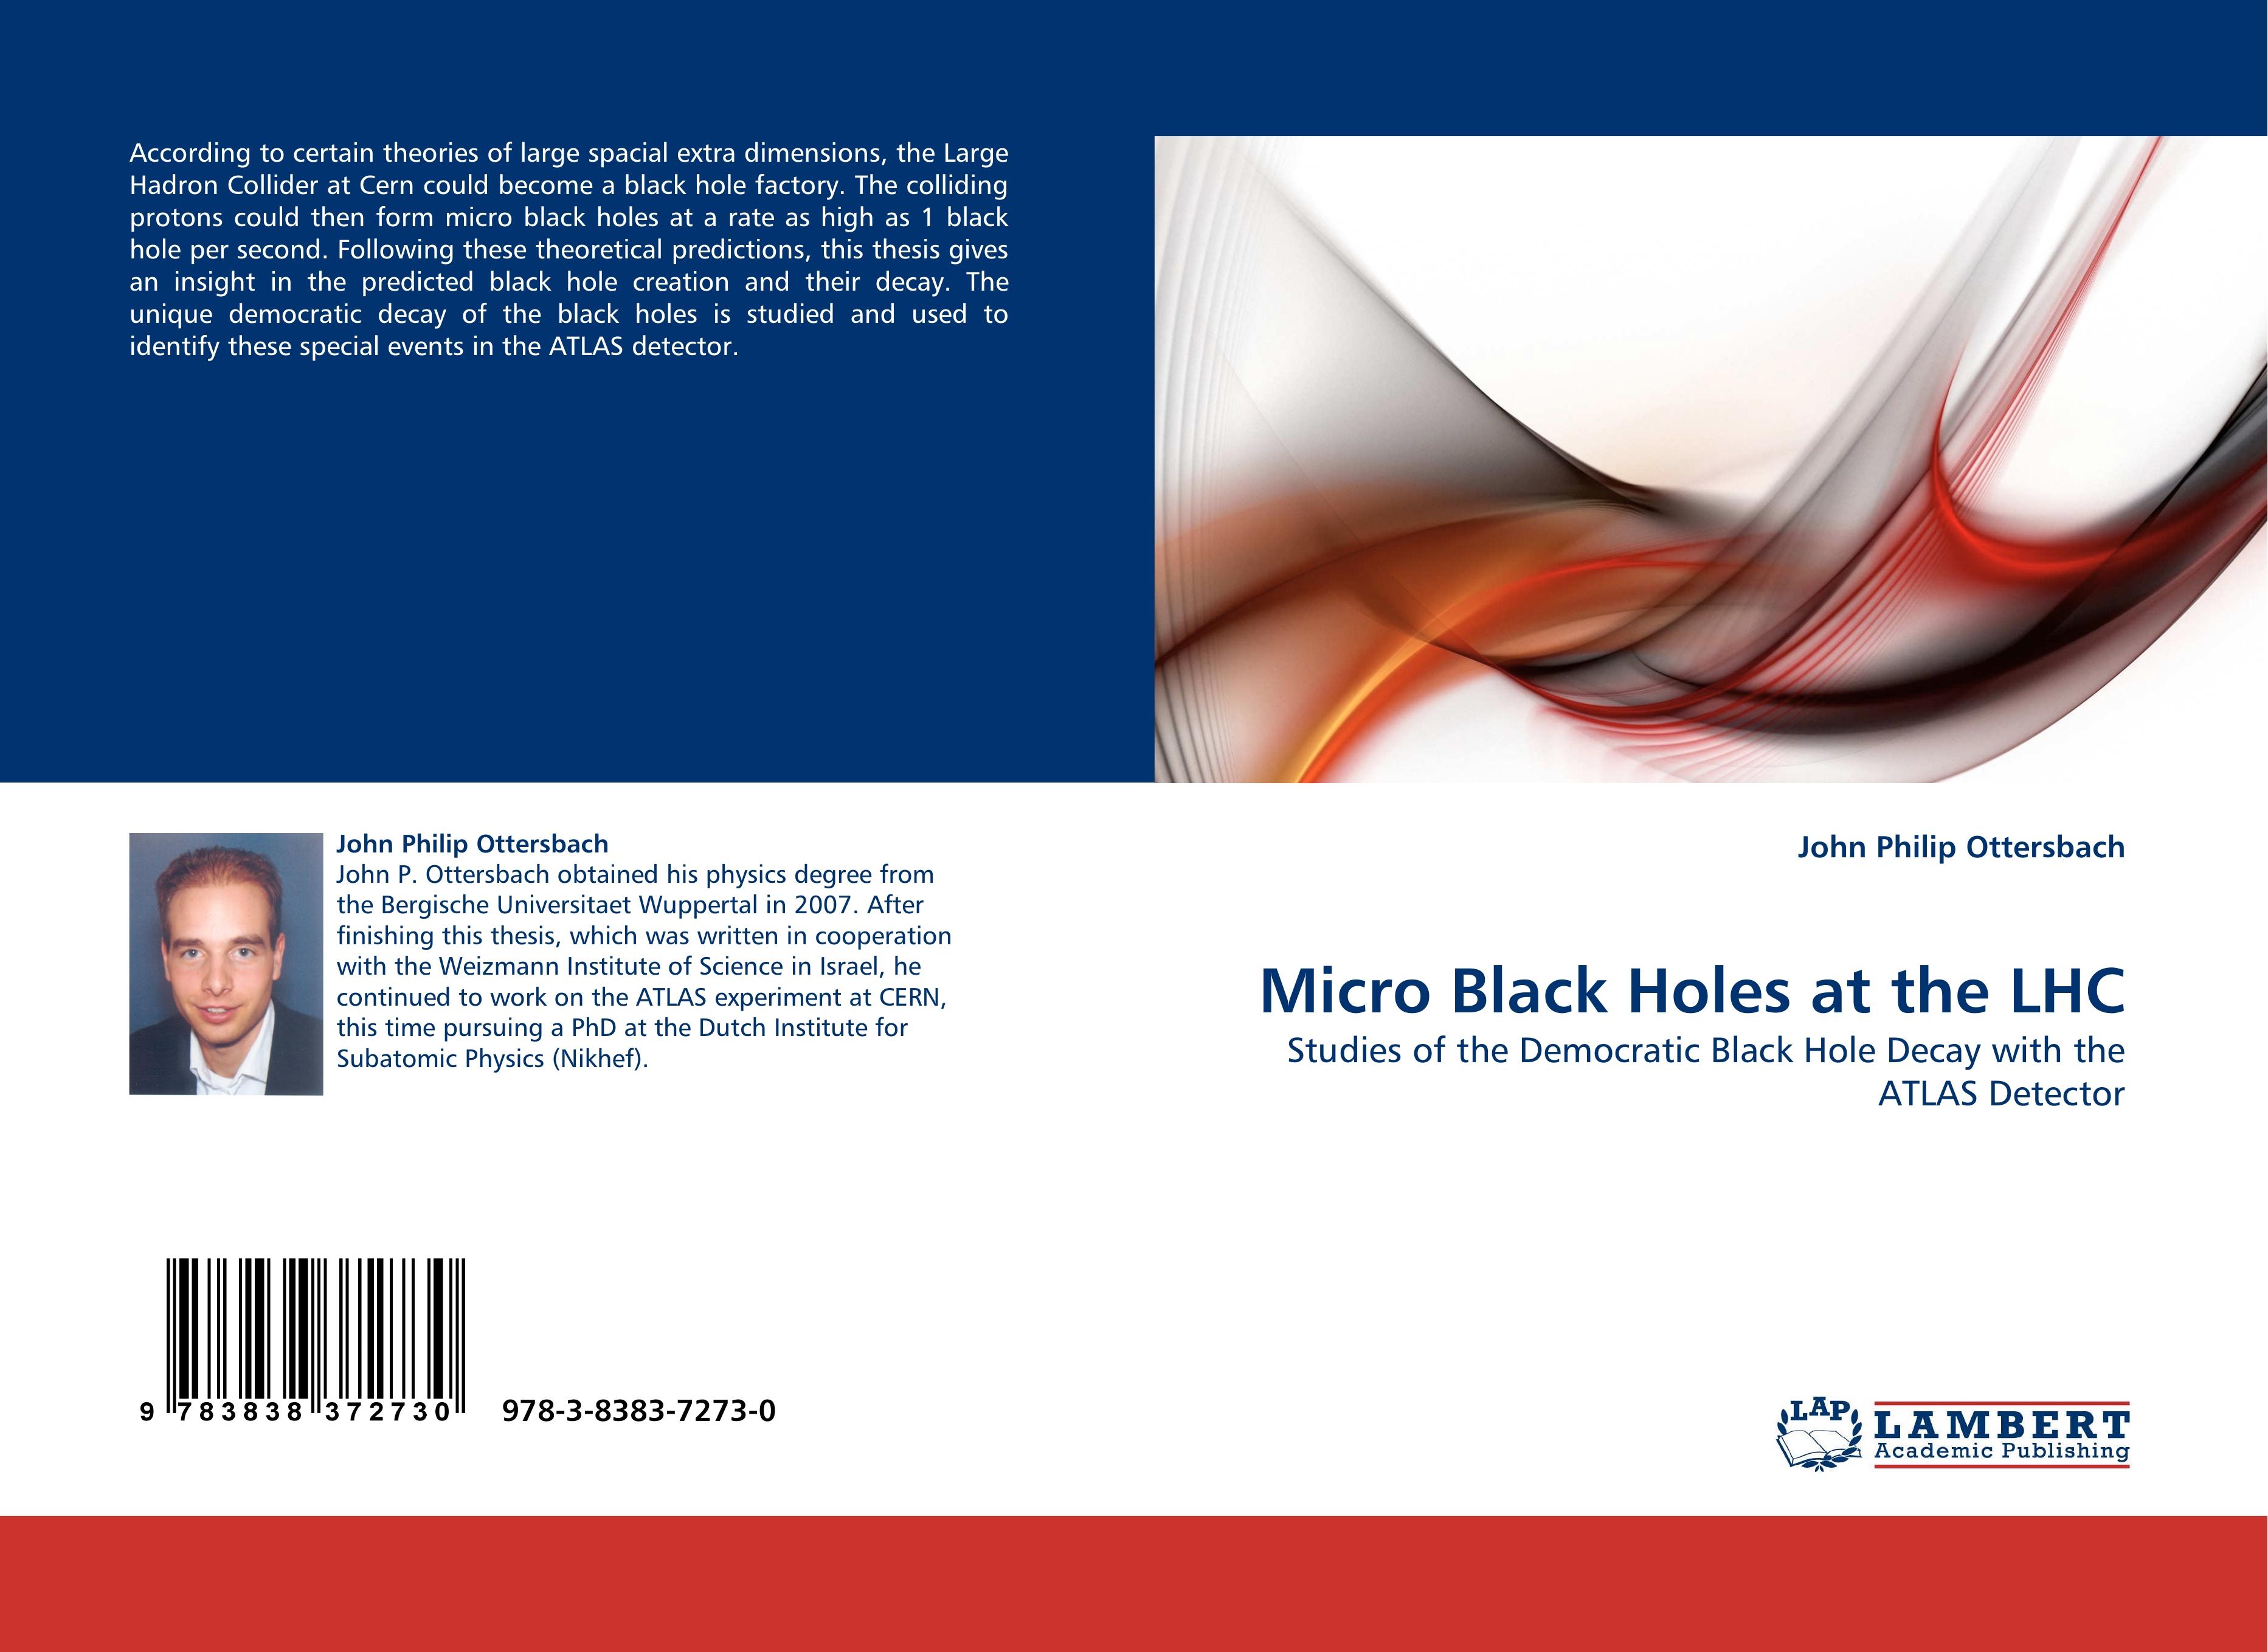 Micro Black Holes at the LHC / Studies of the Democratic Black Hole Decay with the ATLAS Detector / John Philip Ottersbach / Taschenbuch / Paperback / 96 S. / Englisch / 2010 / EAN 9783838372730 - Ottersbach, John Philip